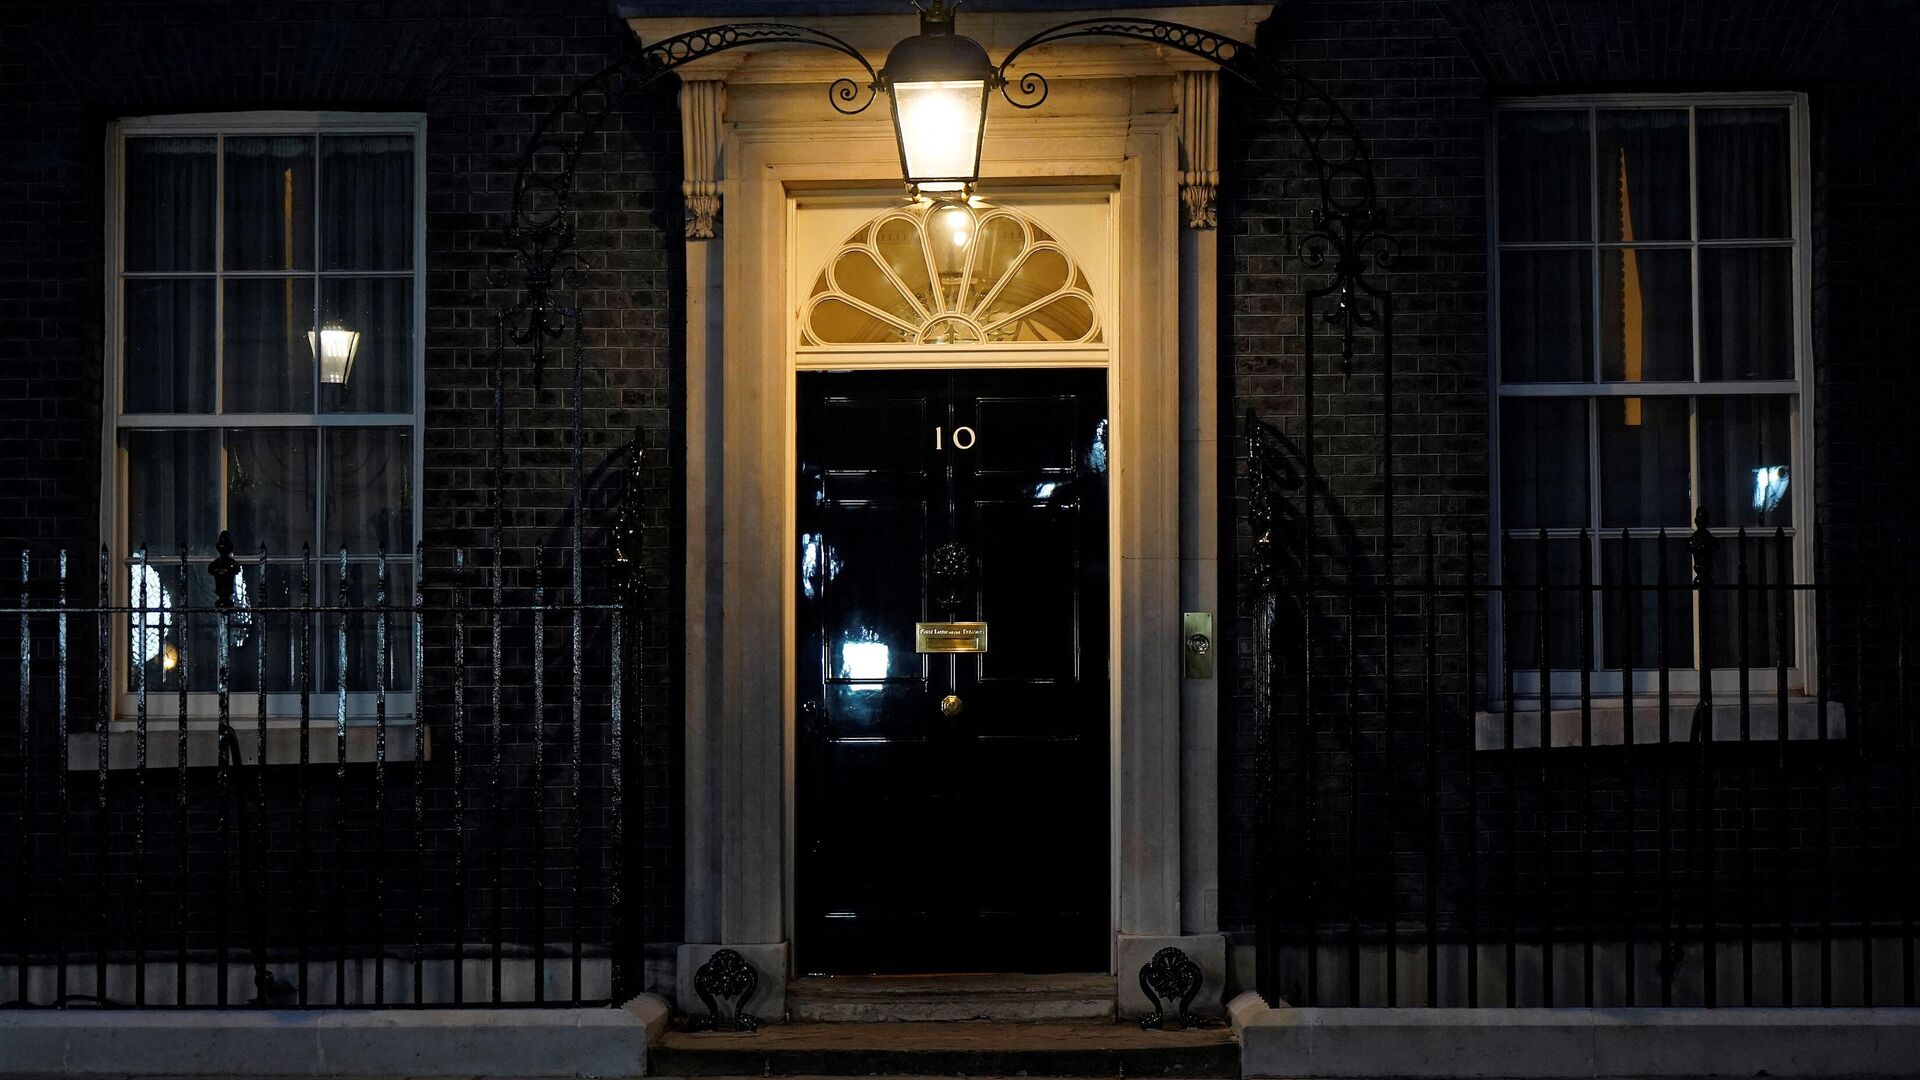 A light shines above the door of 10 Downing Street, the official residence of Britain's Prime Minister, in central London on January 31, 2022. - Sputnik International, 1920, 10.02.2022